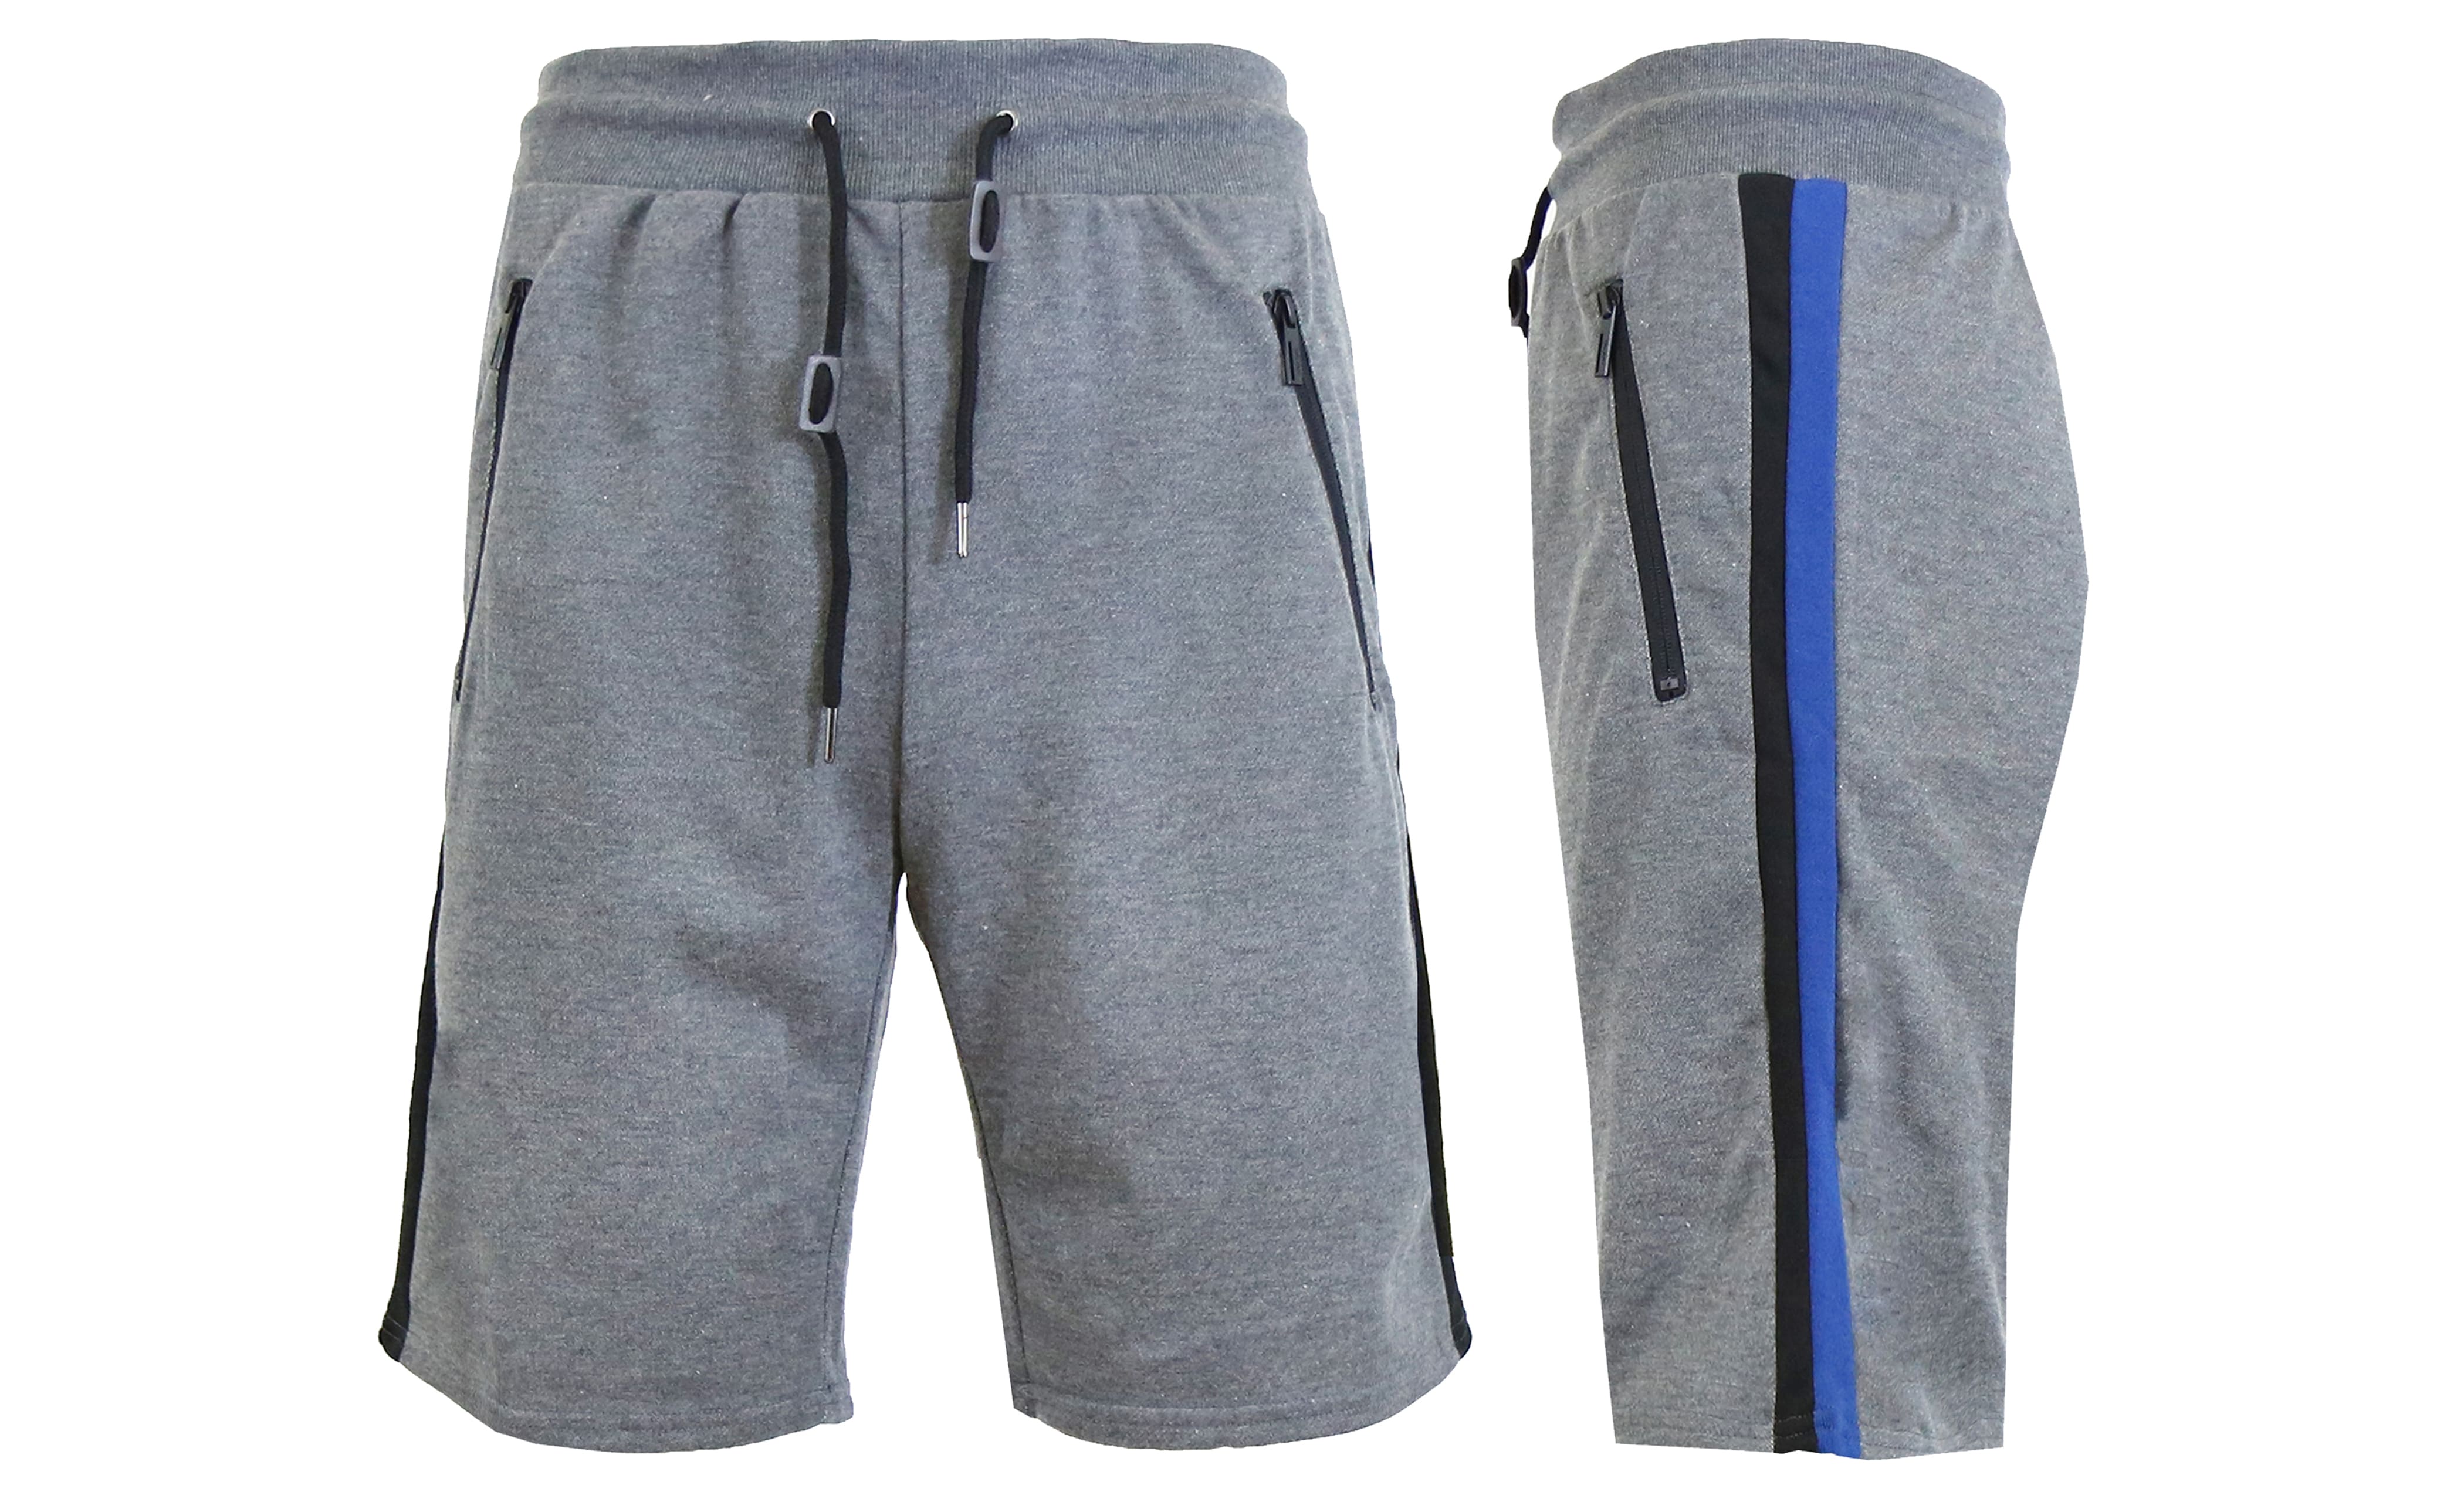 Galaxy By Harvic French Terry Sweat Shorts With Contrast Trims & Side Zipper Pockets